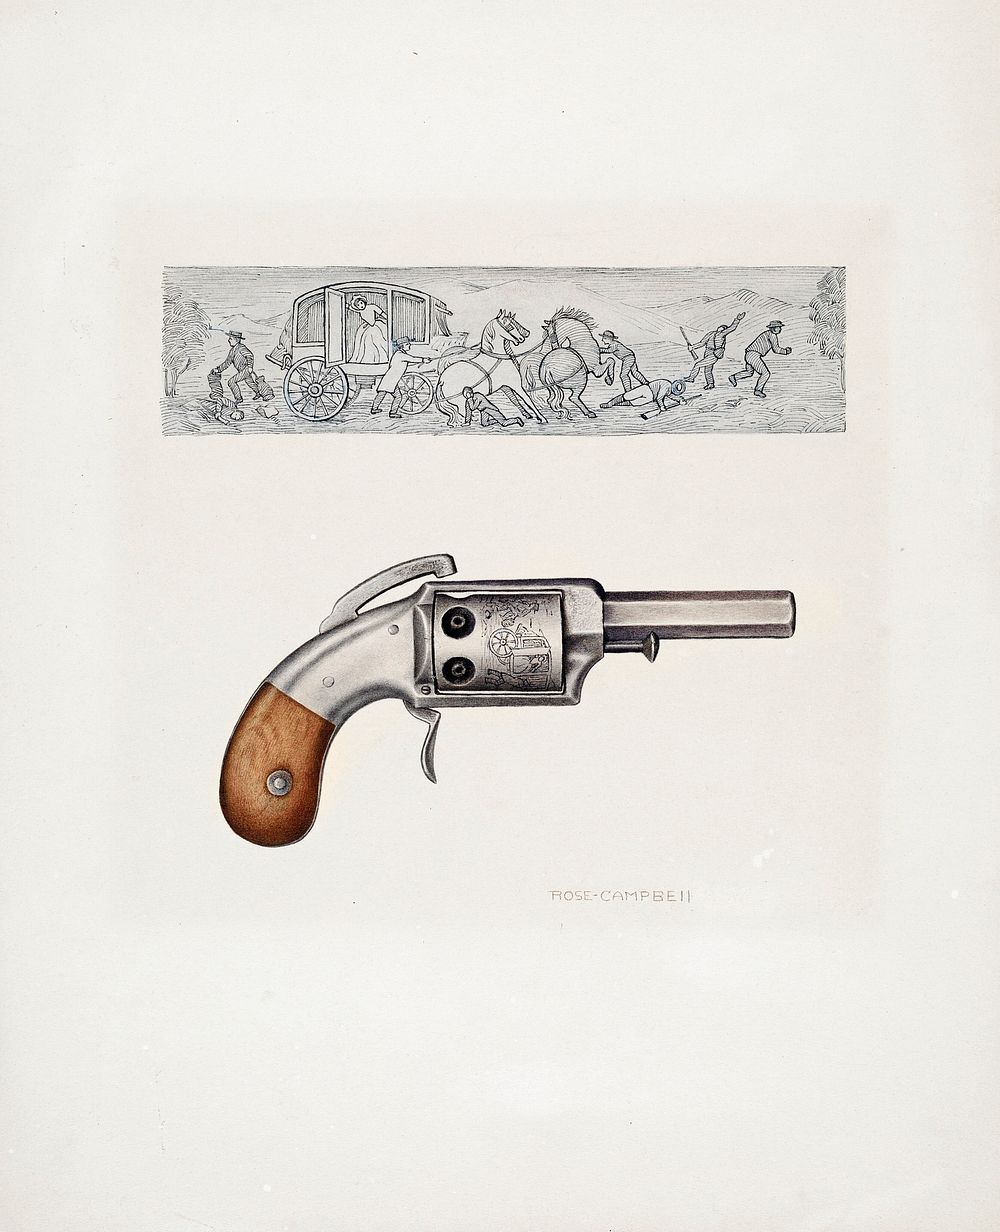 Revolver (1935&ndash;1942) by Rose Campbell-Gerke. Original from The National Gallery of Art. Digitally enhanced by rawpixel.